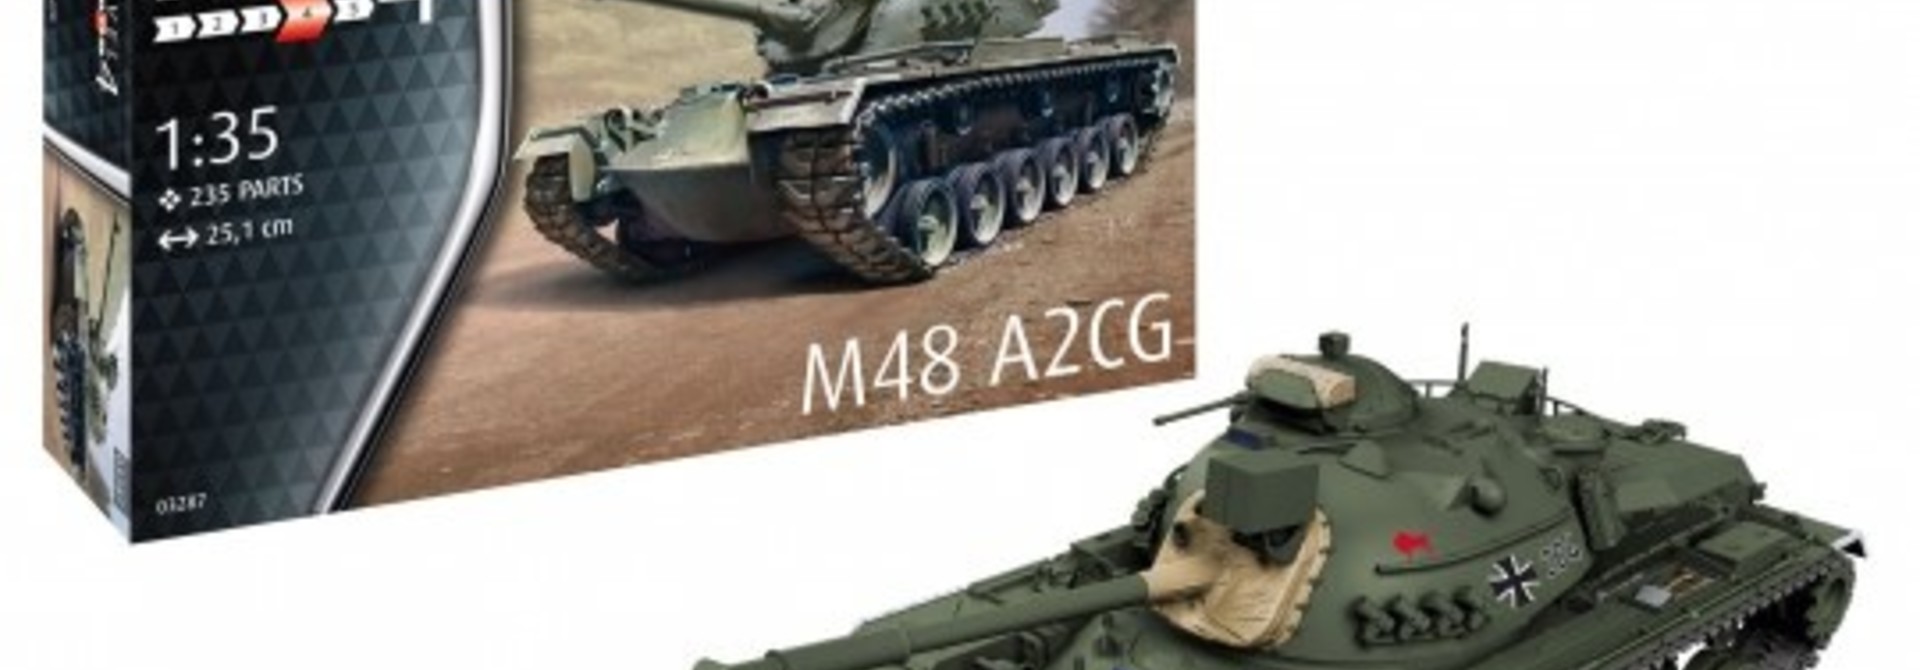 Revell 1:35 M48 A2CG